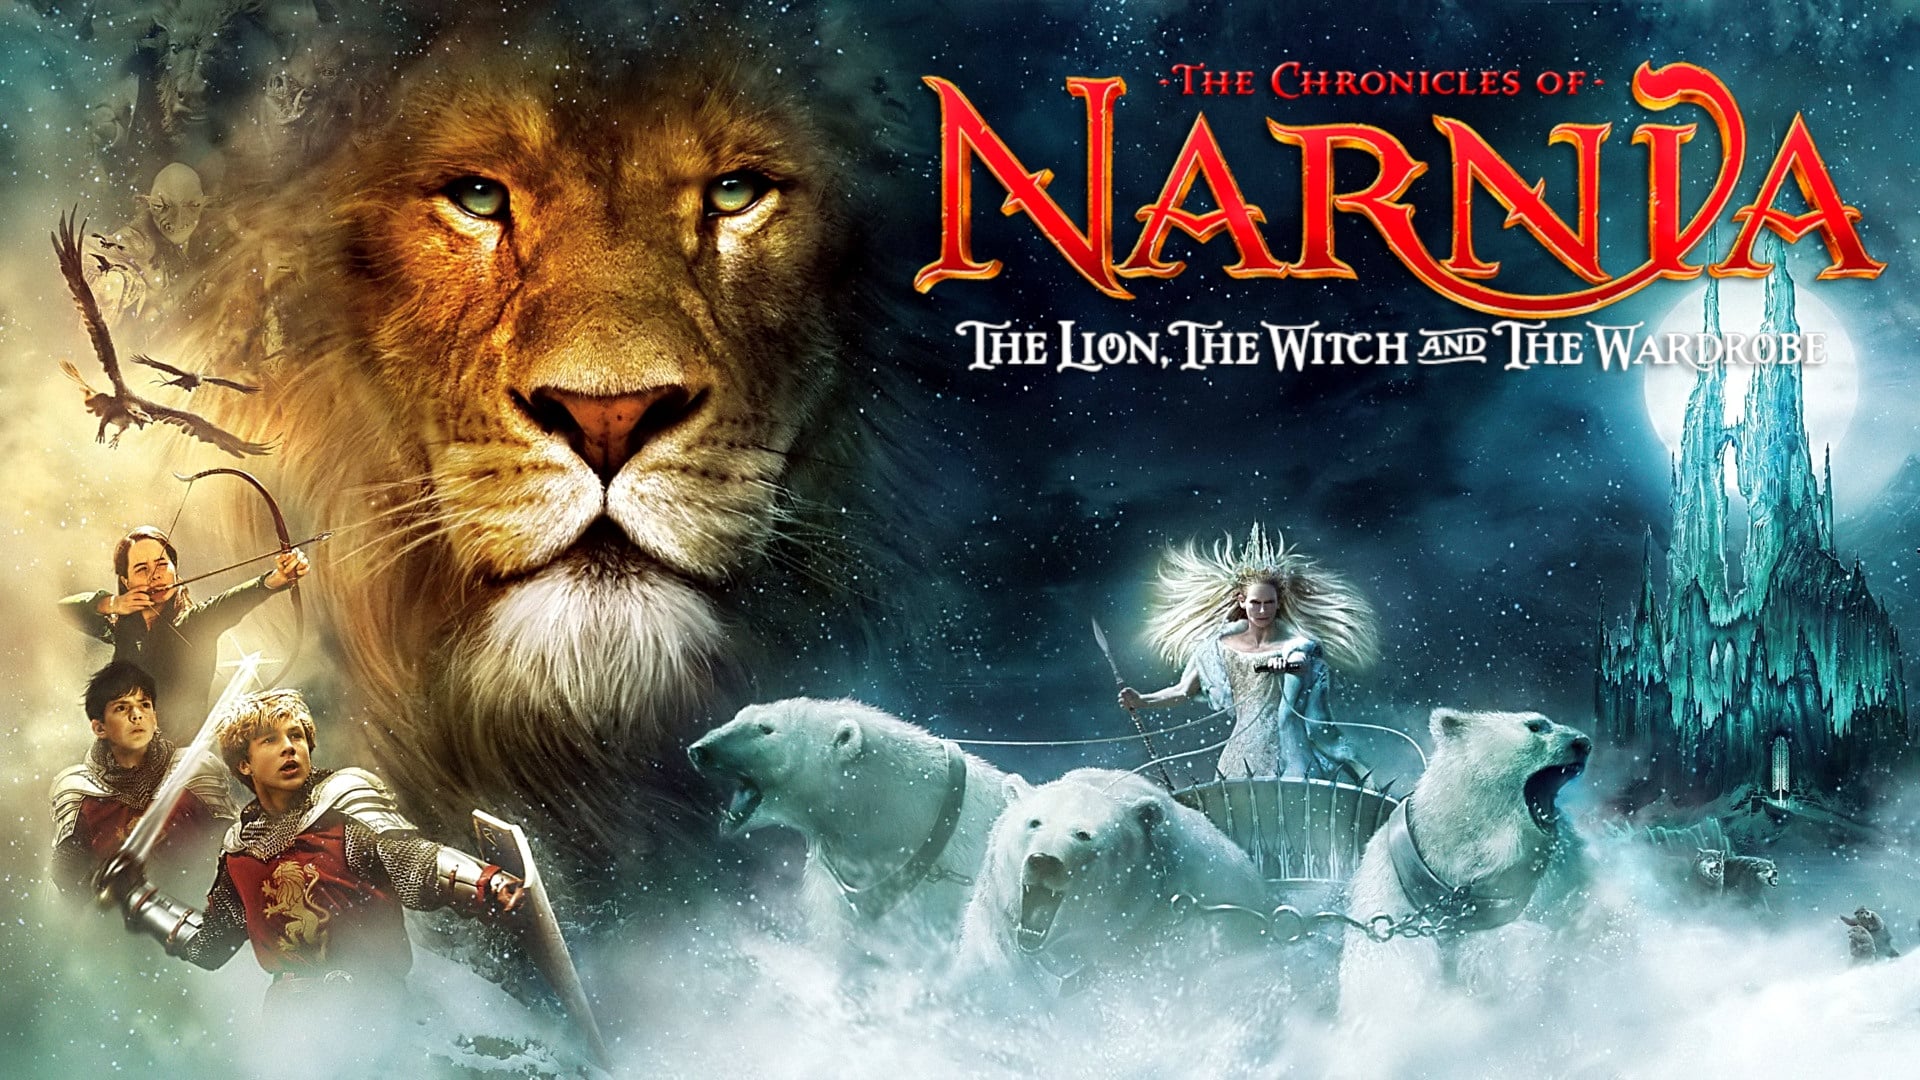 chronicles of narnia audio book mp3 torrents